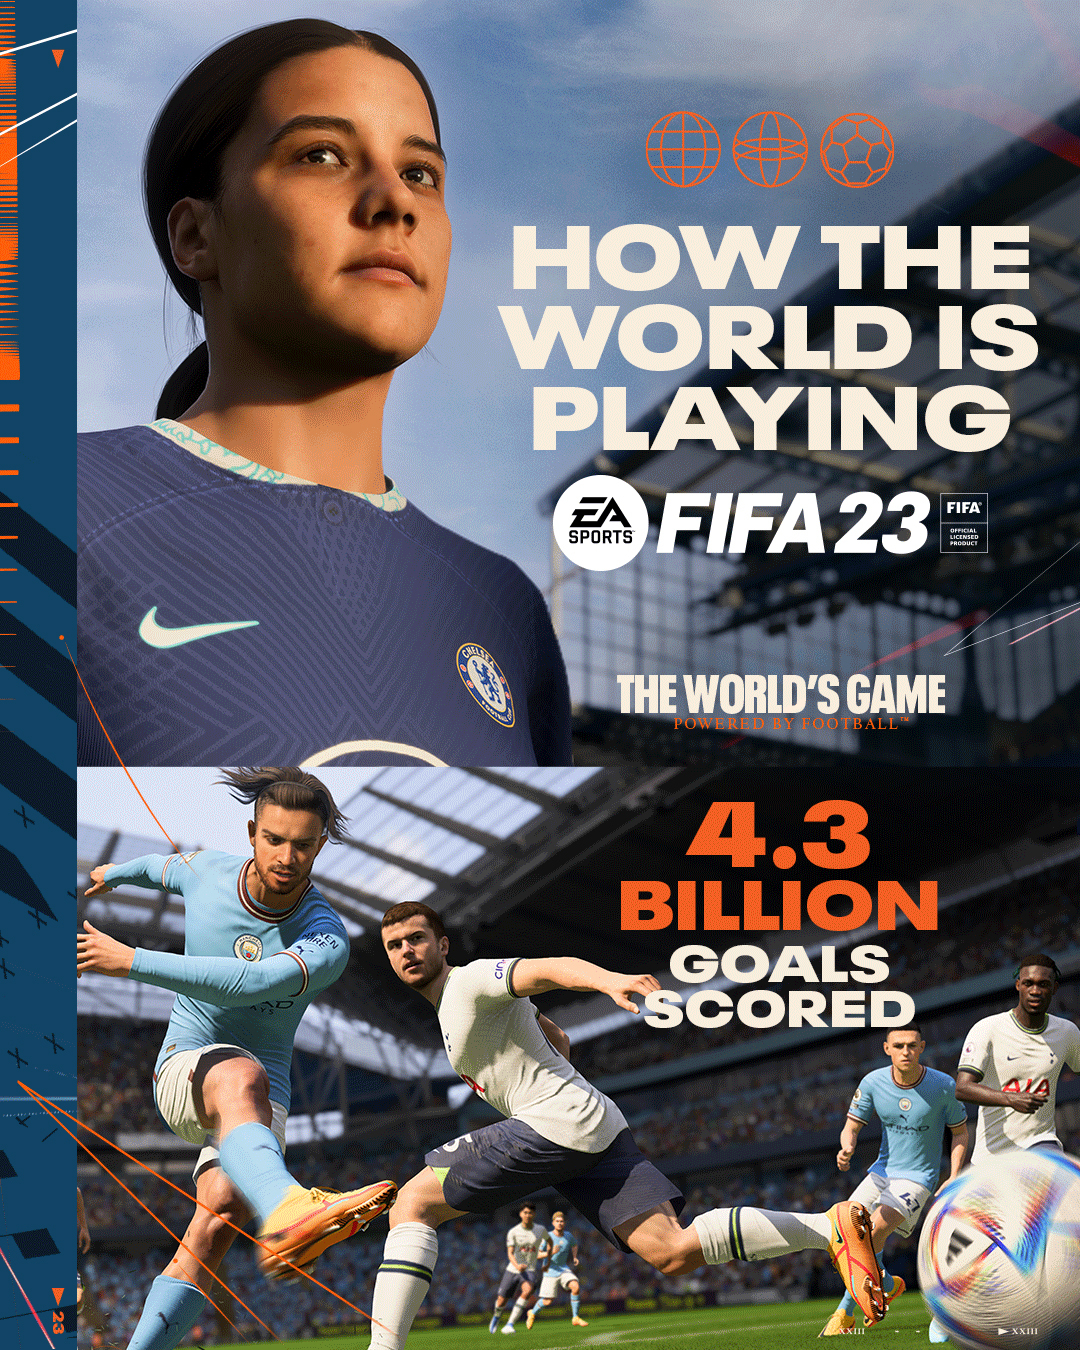 FIFA 23: #SaveProClubs trends as fans are outraged by EA